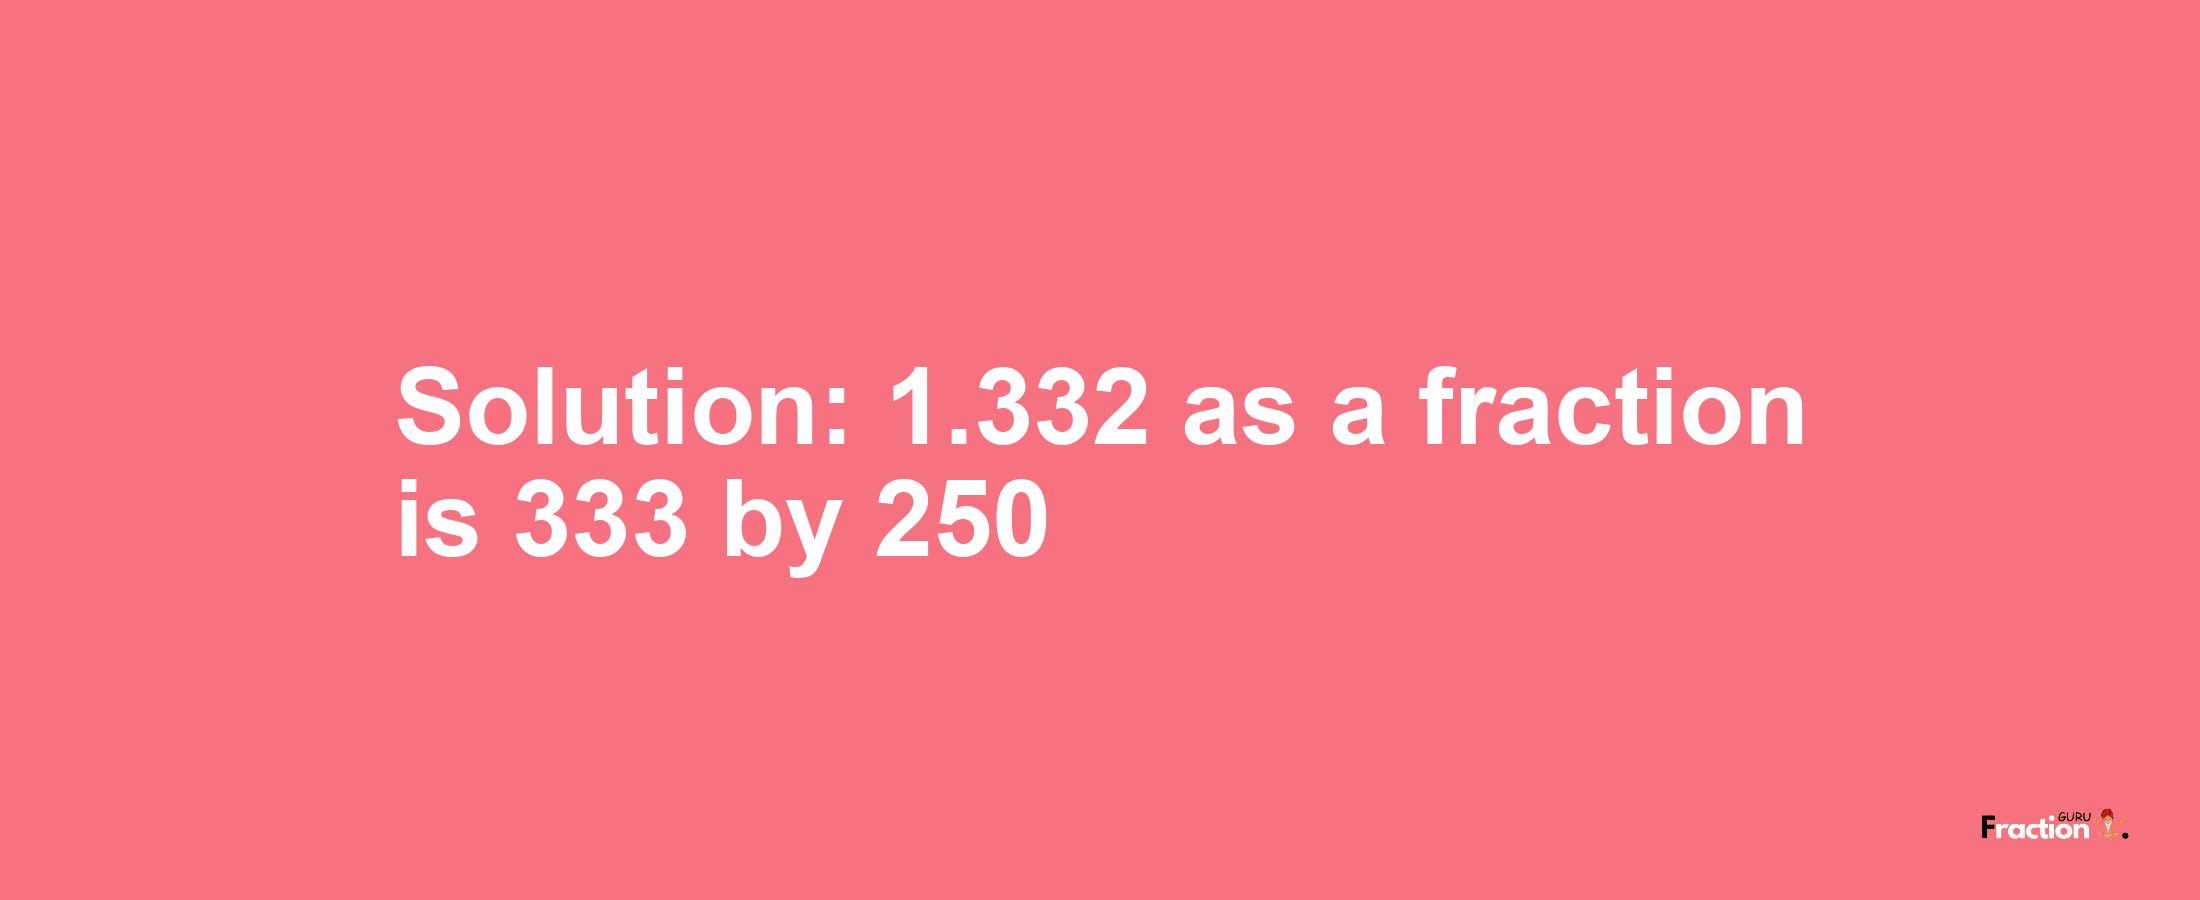 Solution:1.332 as a fraction is 333/250